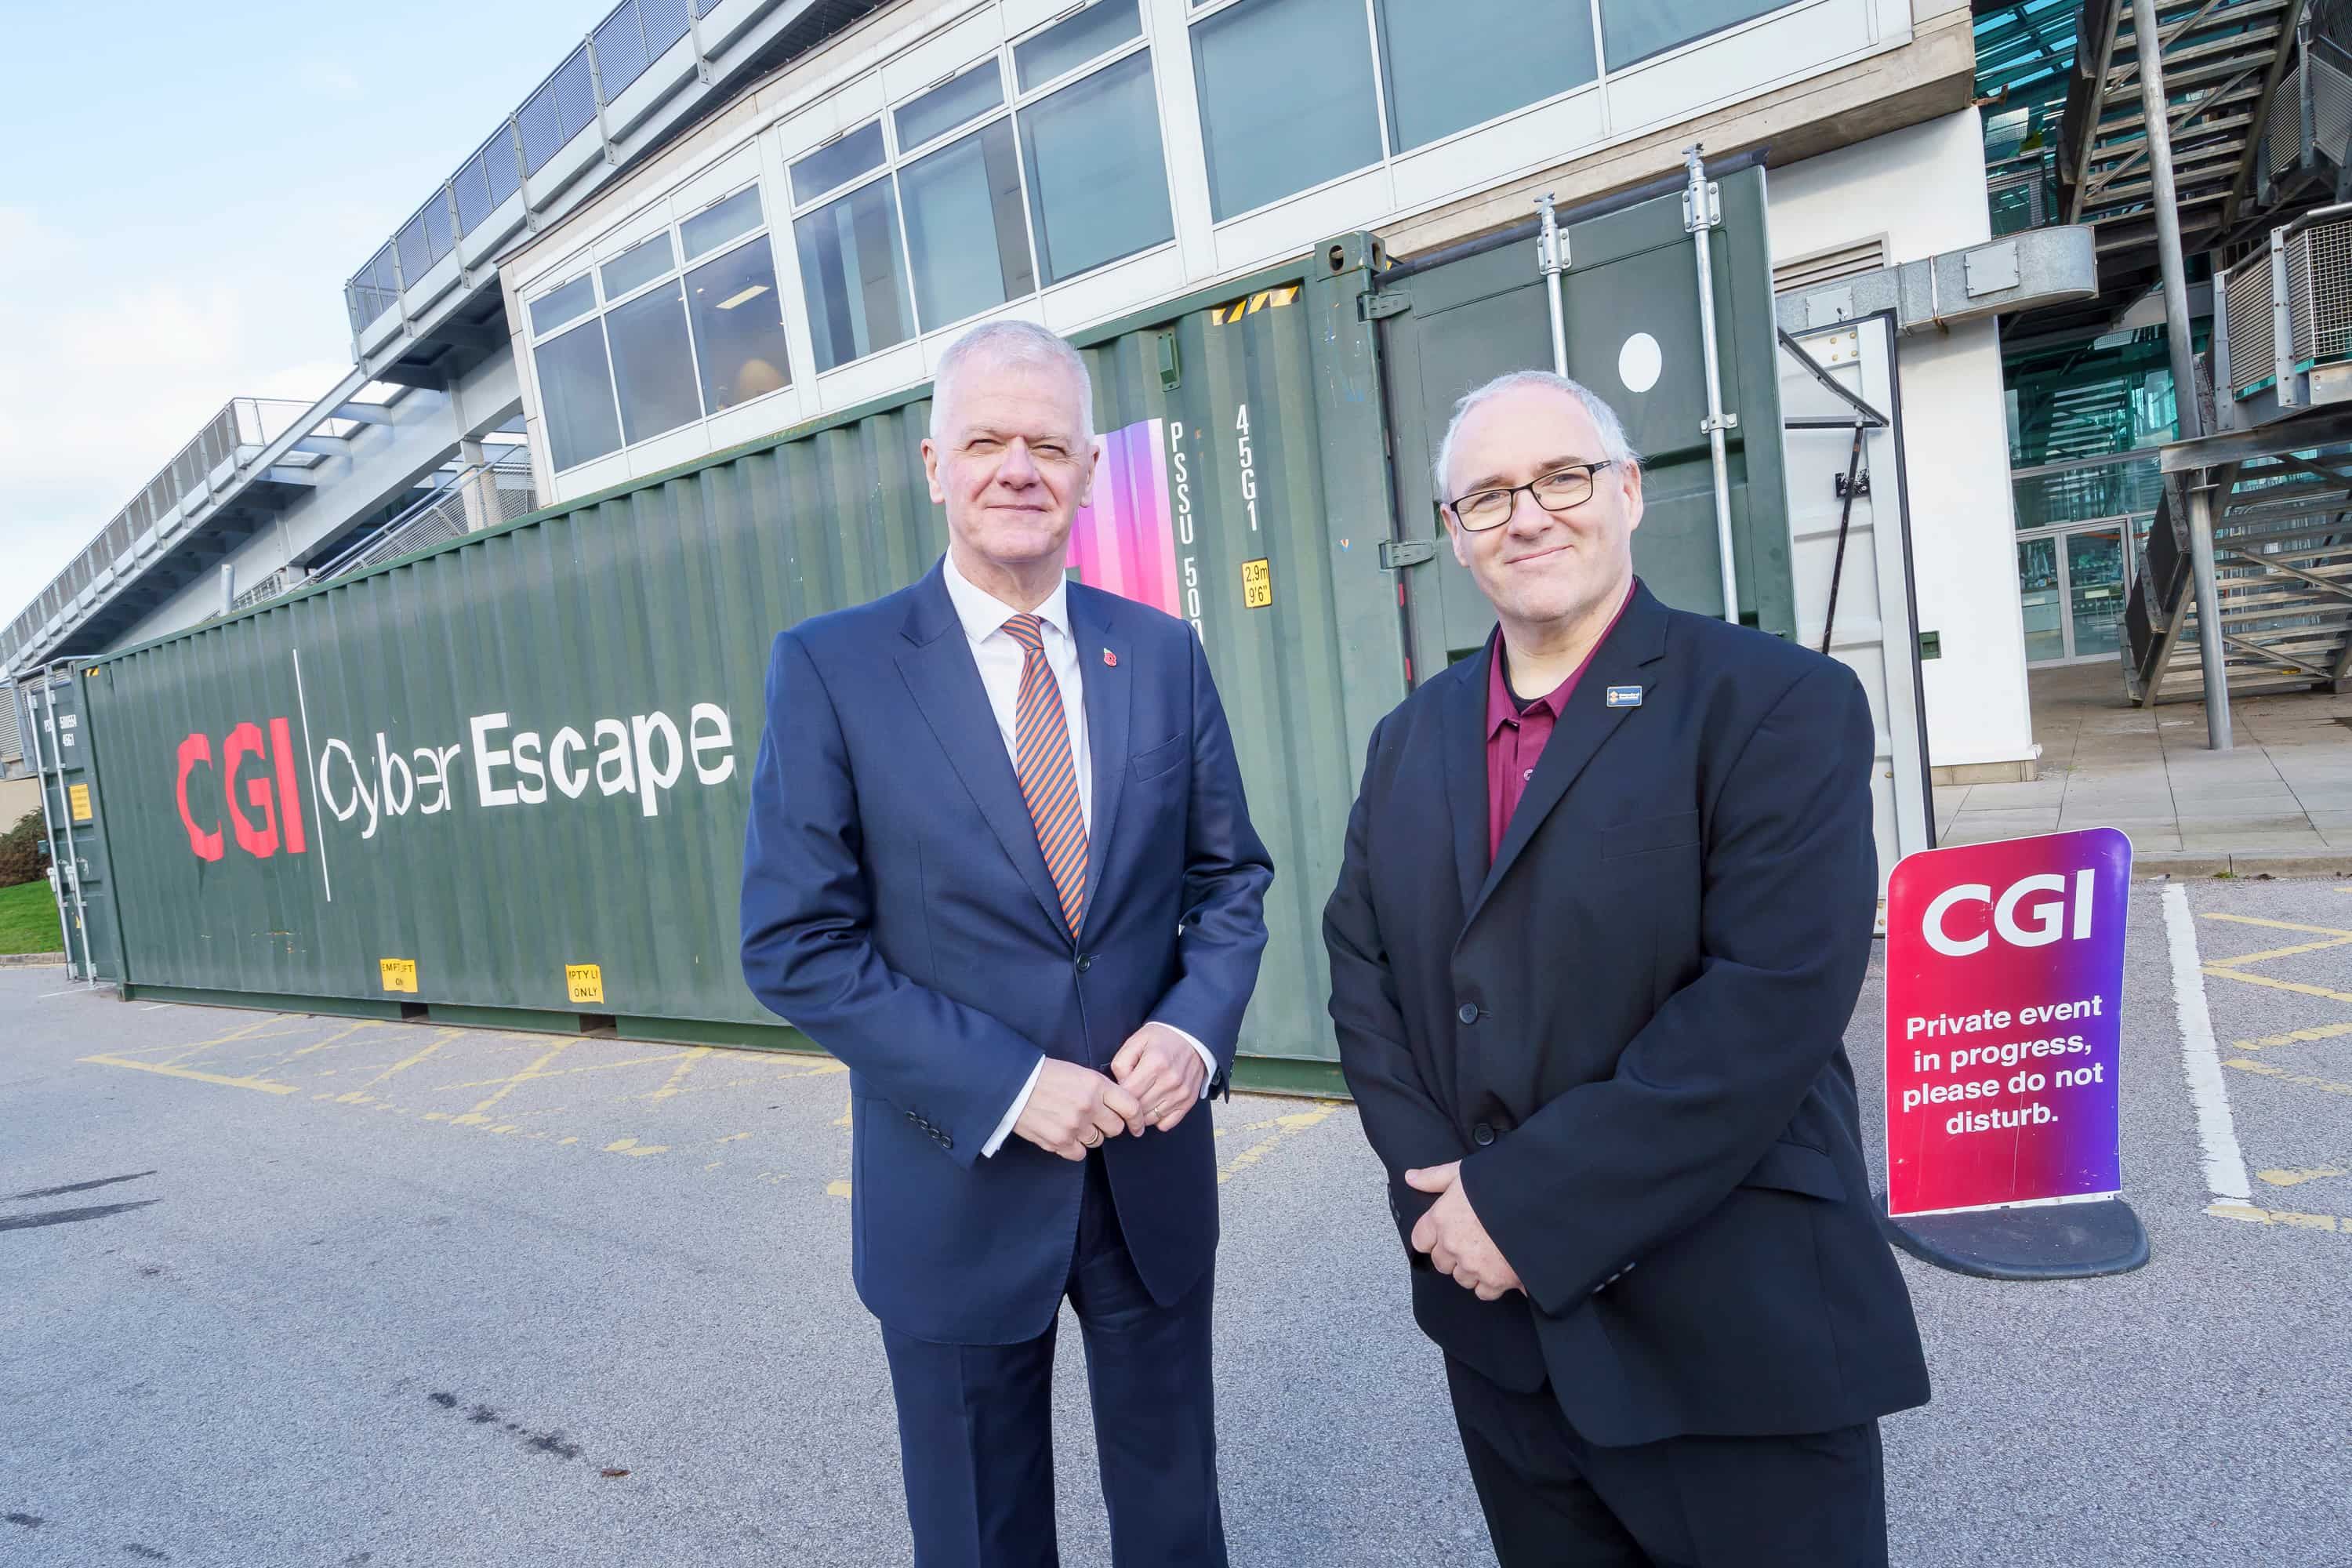 Sir David Bell and Professor John Murray standing next to each other outside the CGI cyber escape room